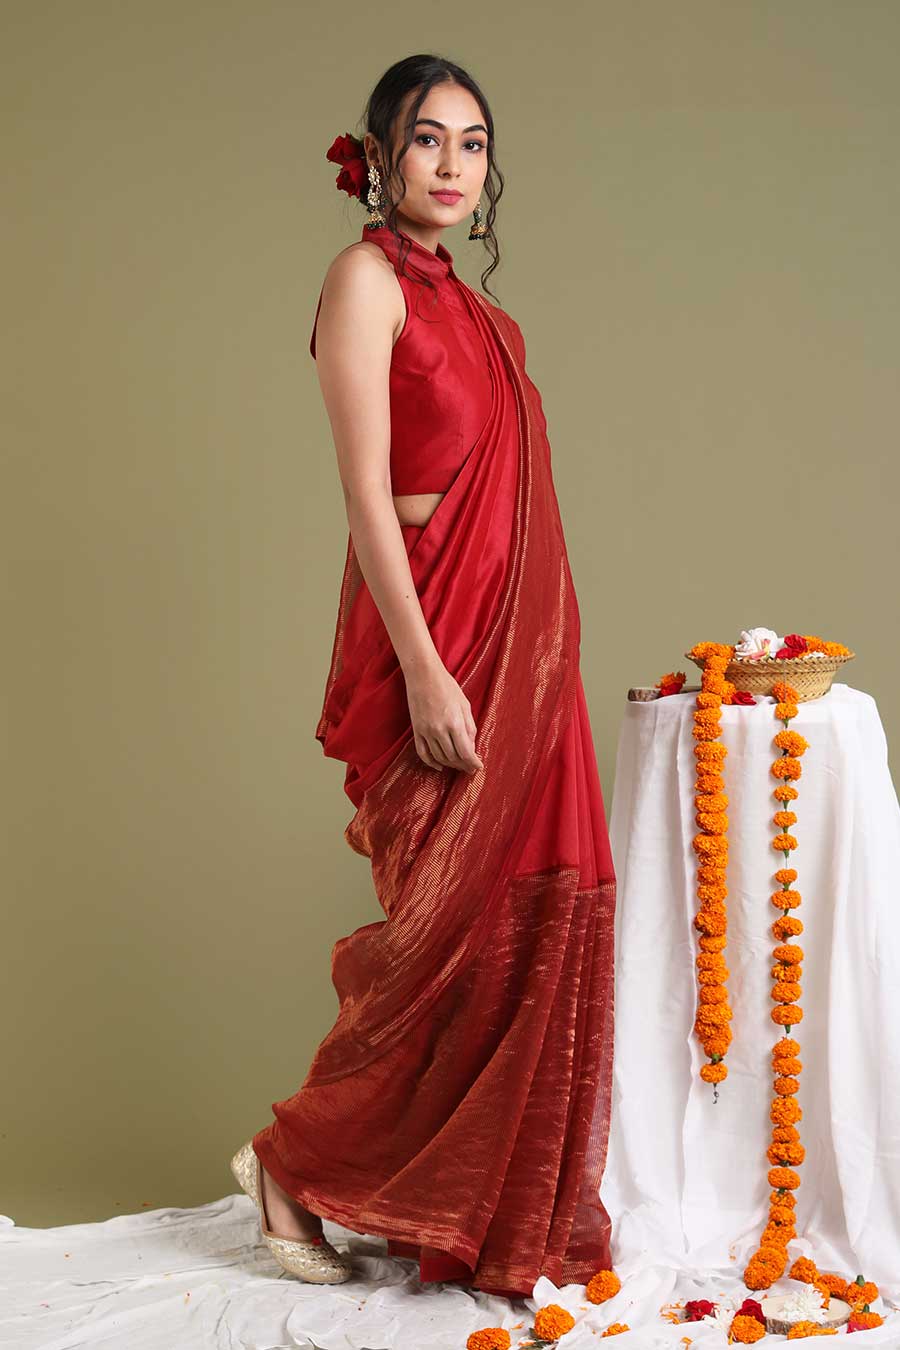 Red Chanderi Handloom Saree With Blouse